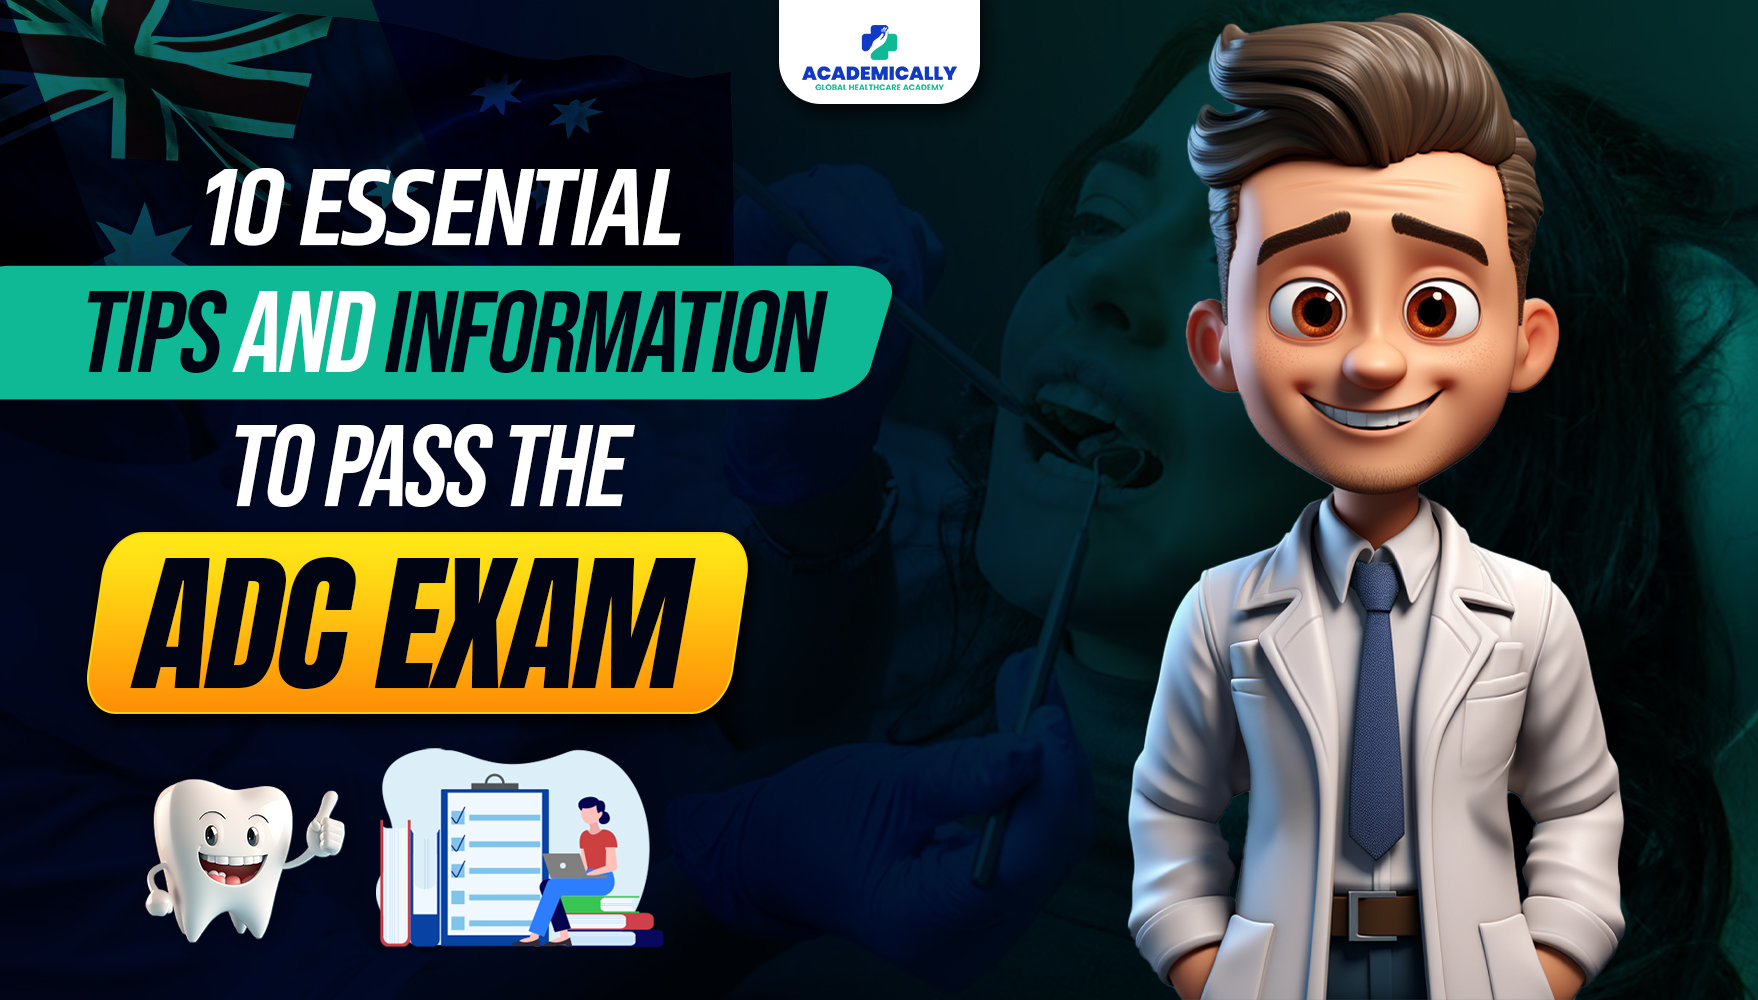 Essential Tips To Pass ADC Exam